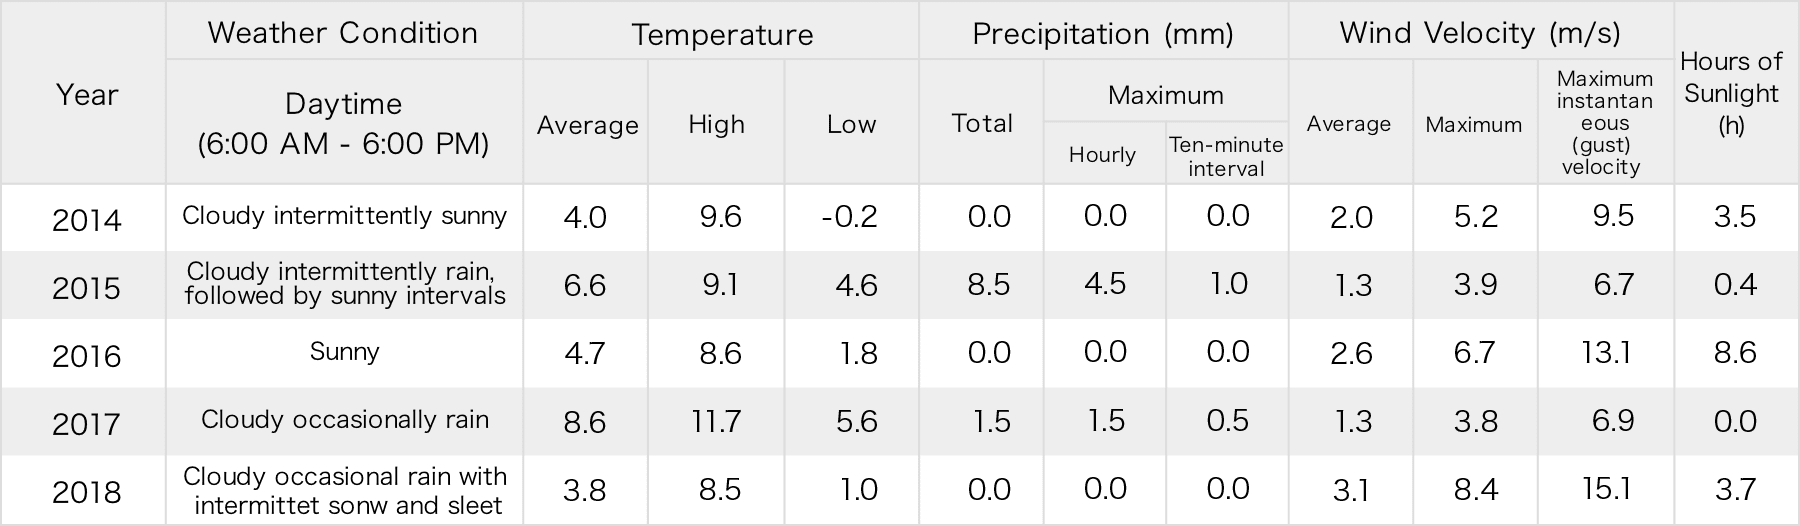 Weather Data for February 17 over the Last Five Years